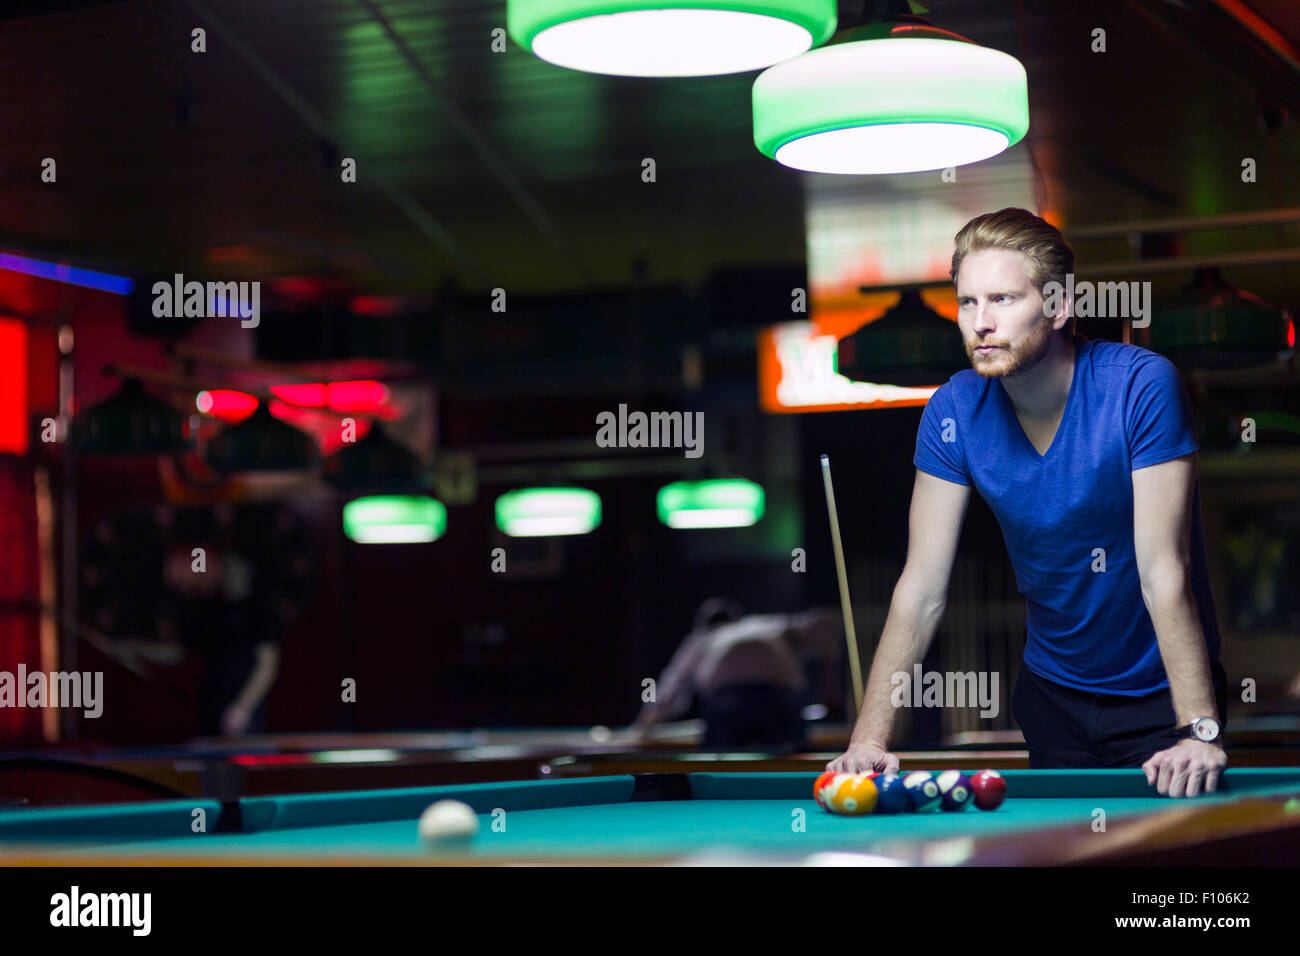 Handsome young snooker player bending over the table in a bar with beautiful ambient lighting Stock Photo